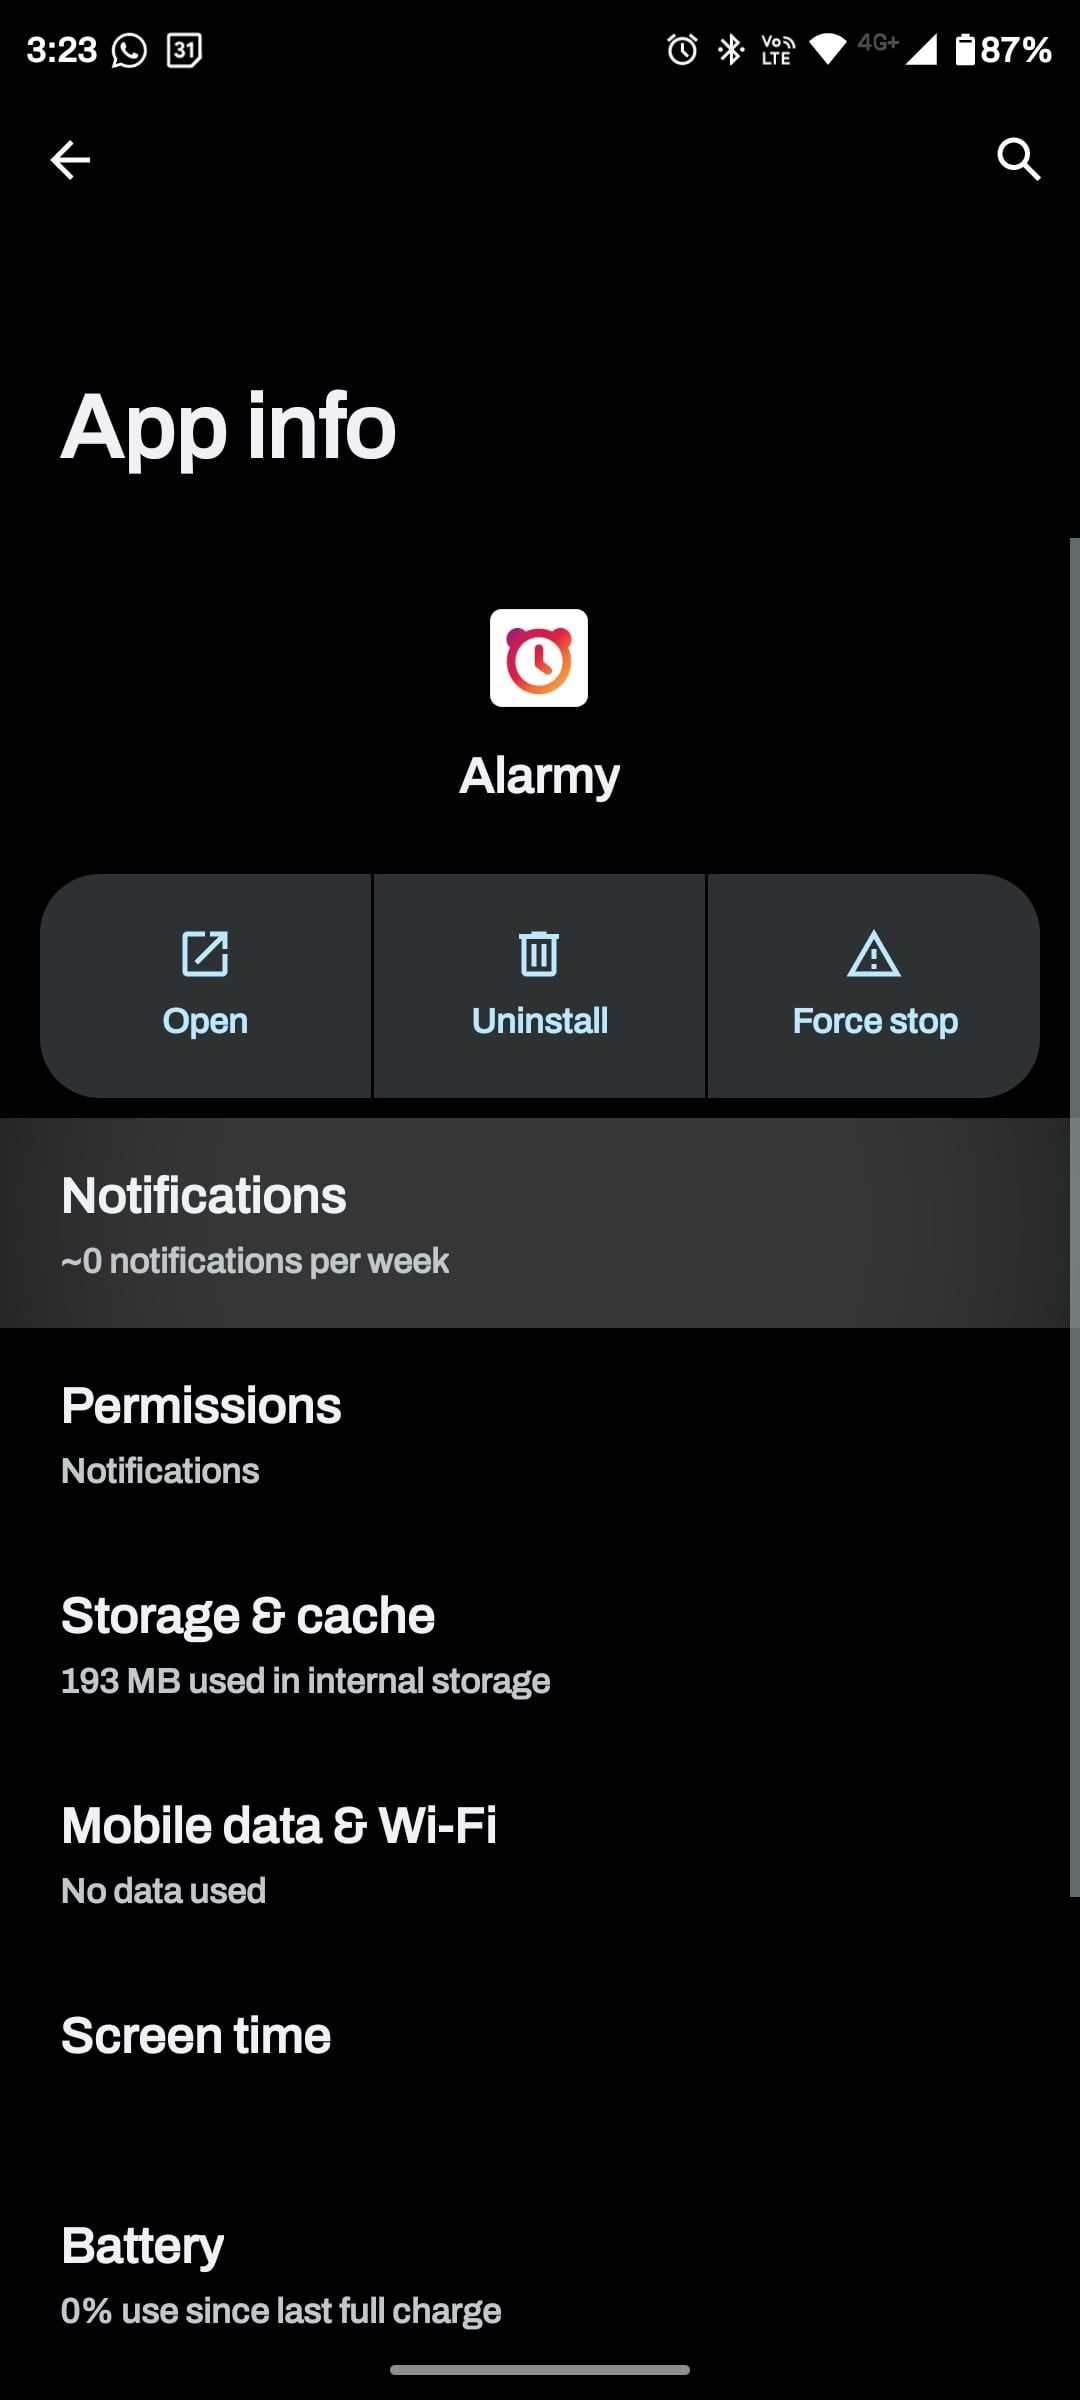 App info page for Alarmy with Notifications option highlighted